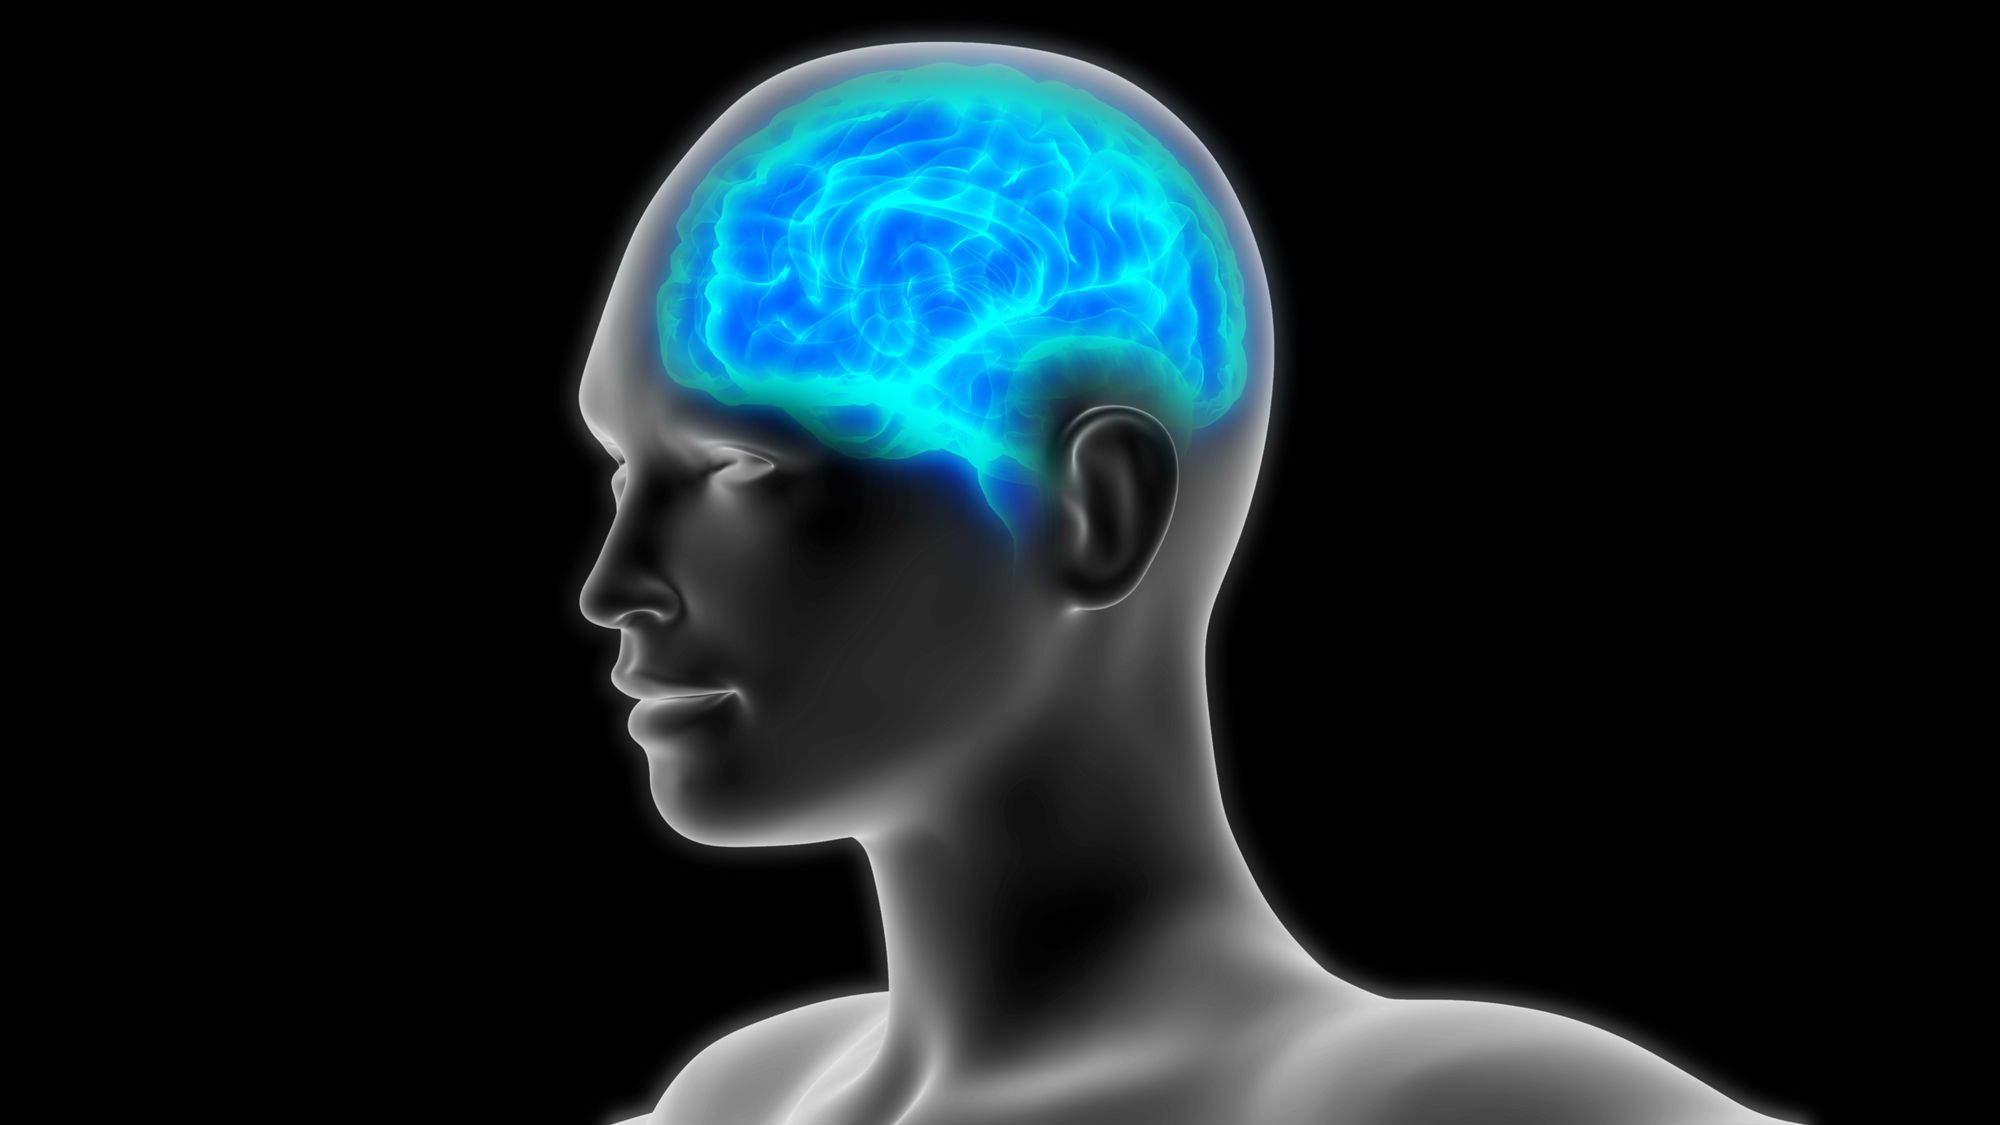 High Dilantin levels can injure one's brain.